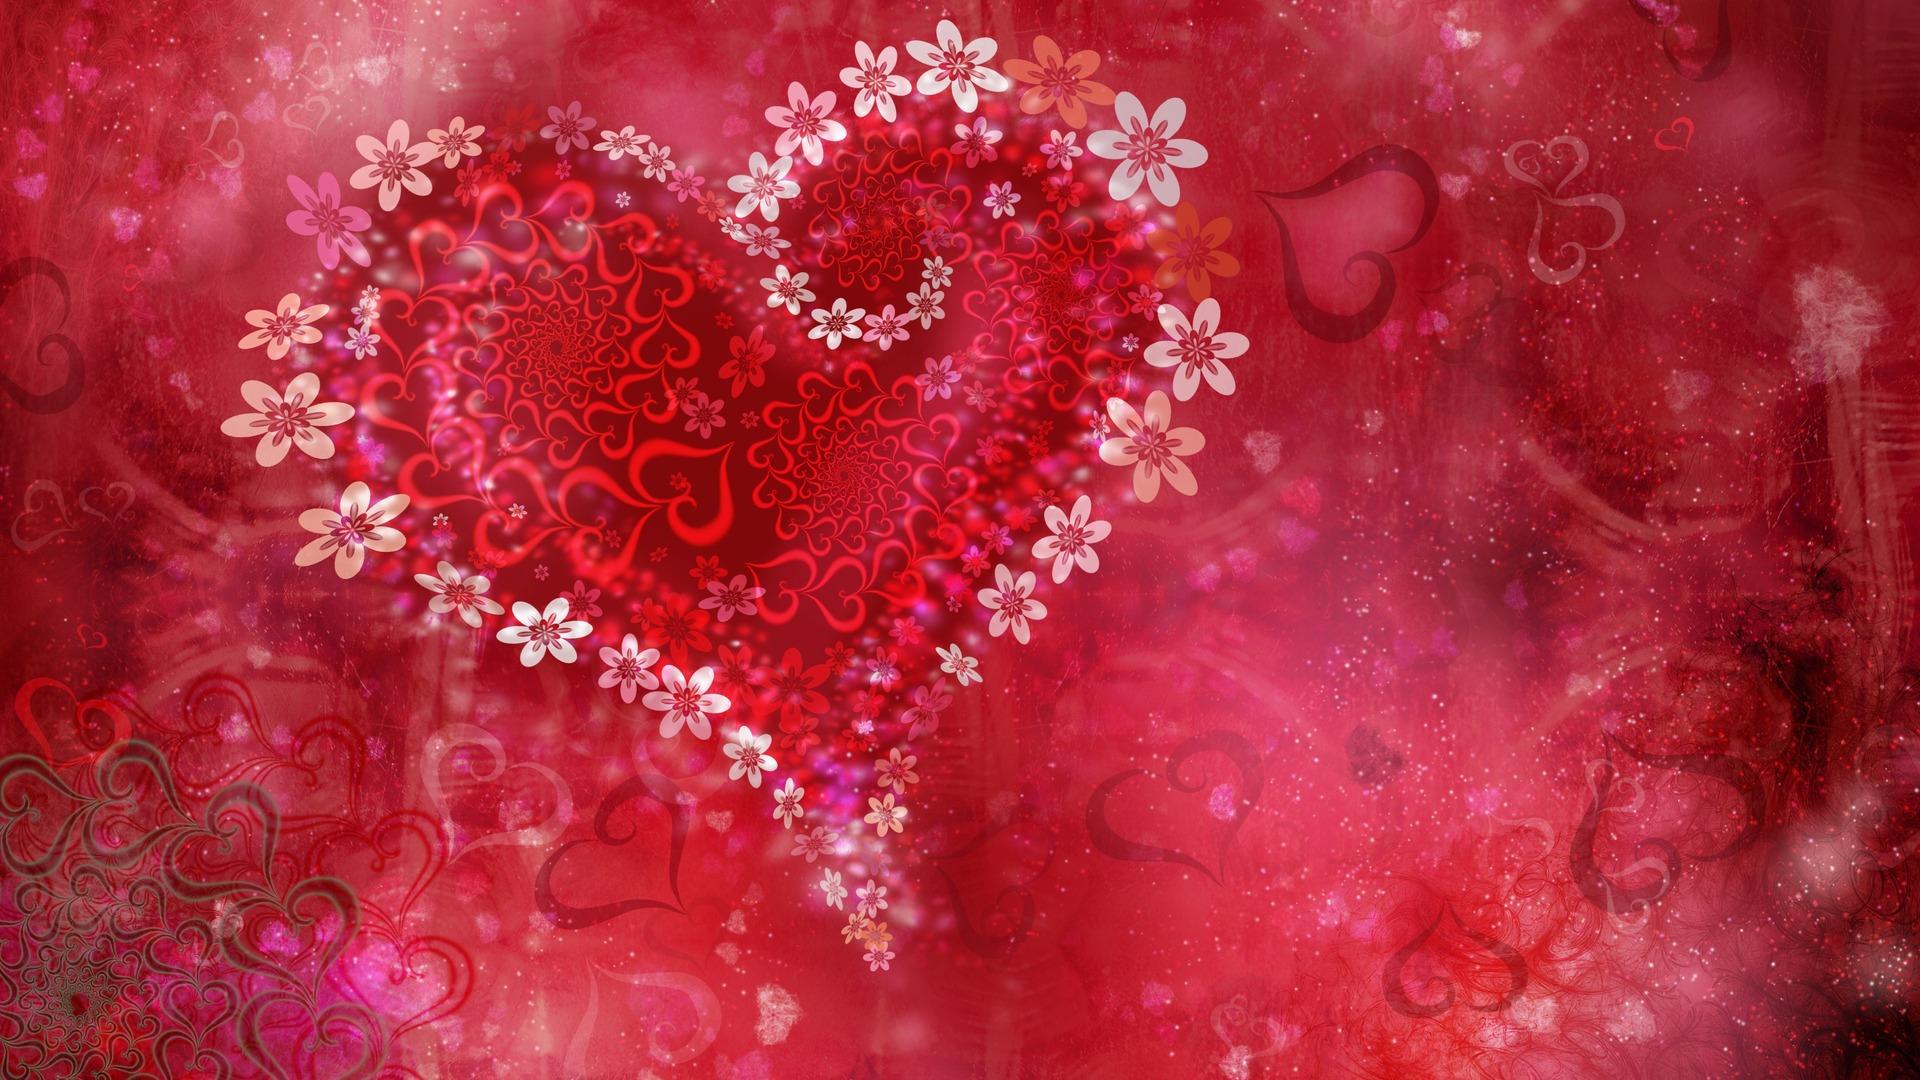 Pink Love Heart Full HD Wallpaper Live Hq Pictures